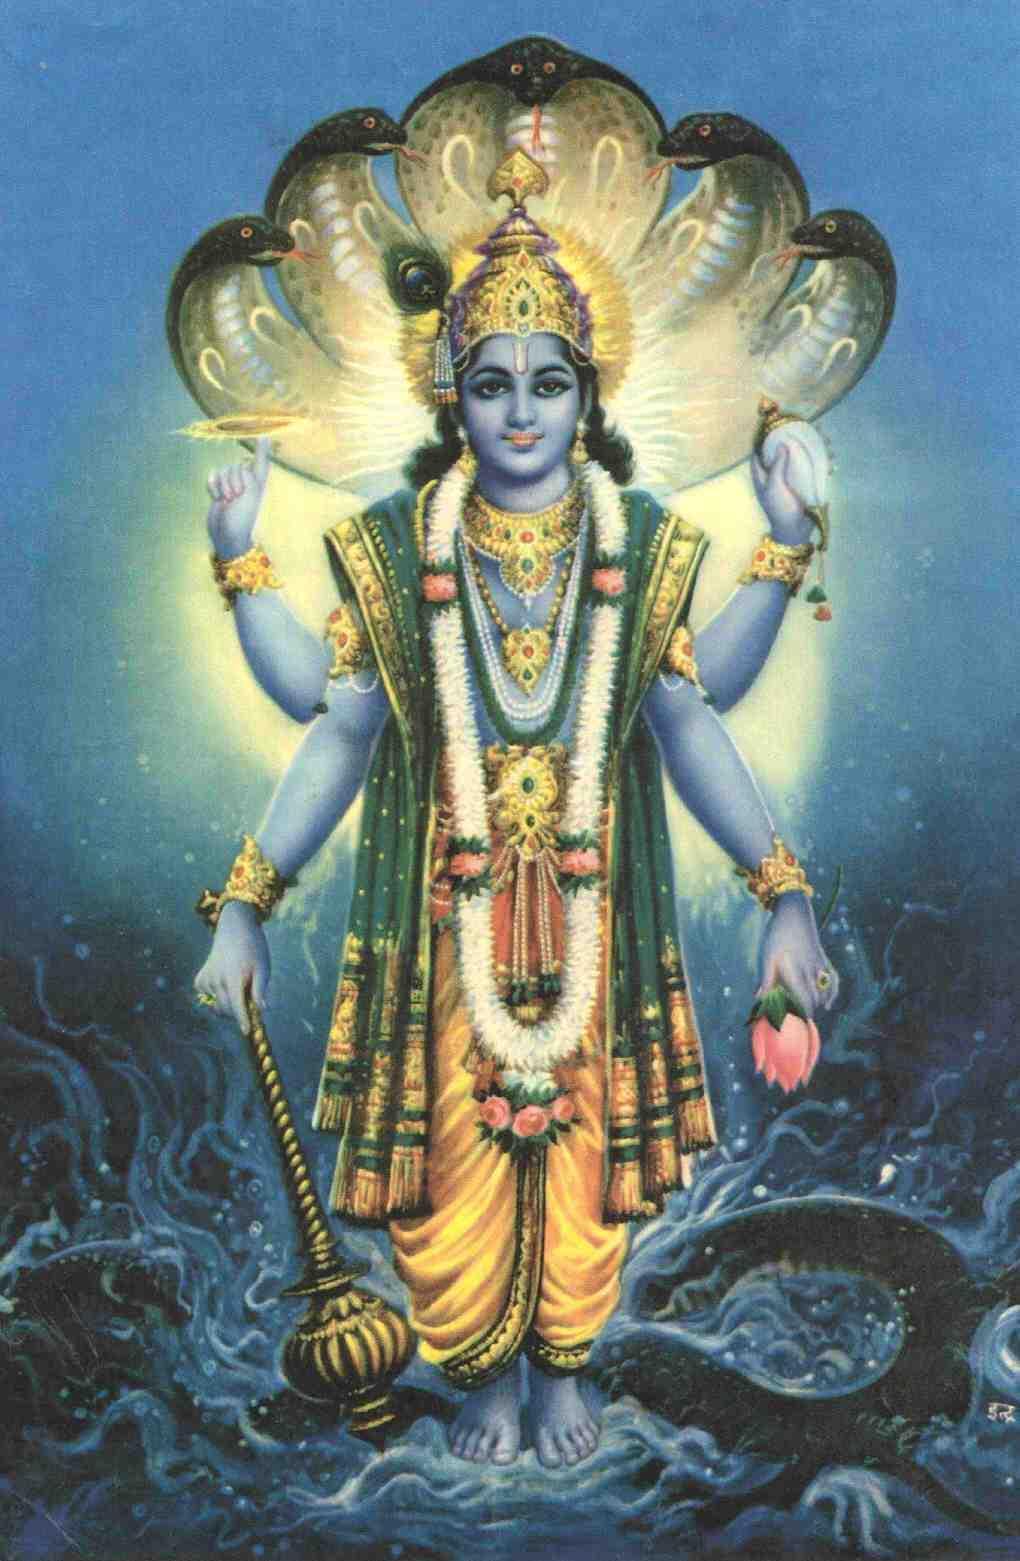 Vishnu the sustainer The peace-loving deity of the Hindu Trinity, Vishnu is the Preserver or Sustainer of life with his steadfast principles of order, righteousness and truth.